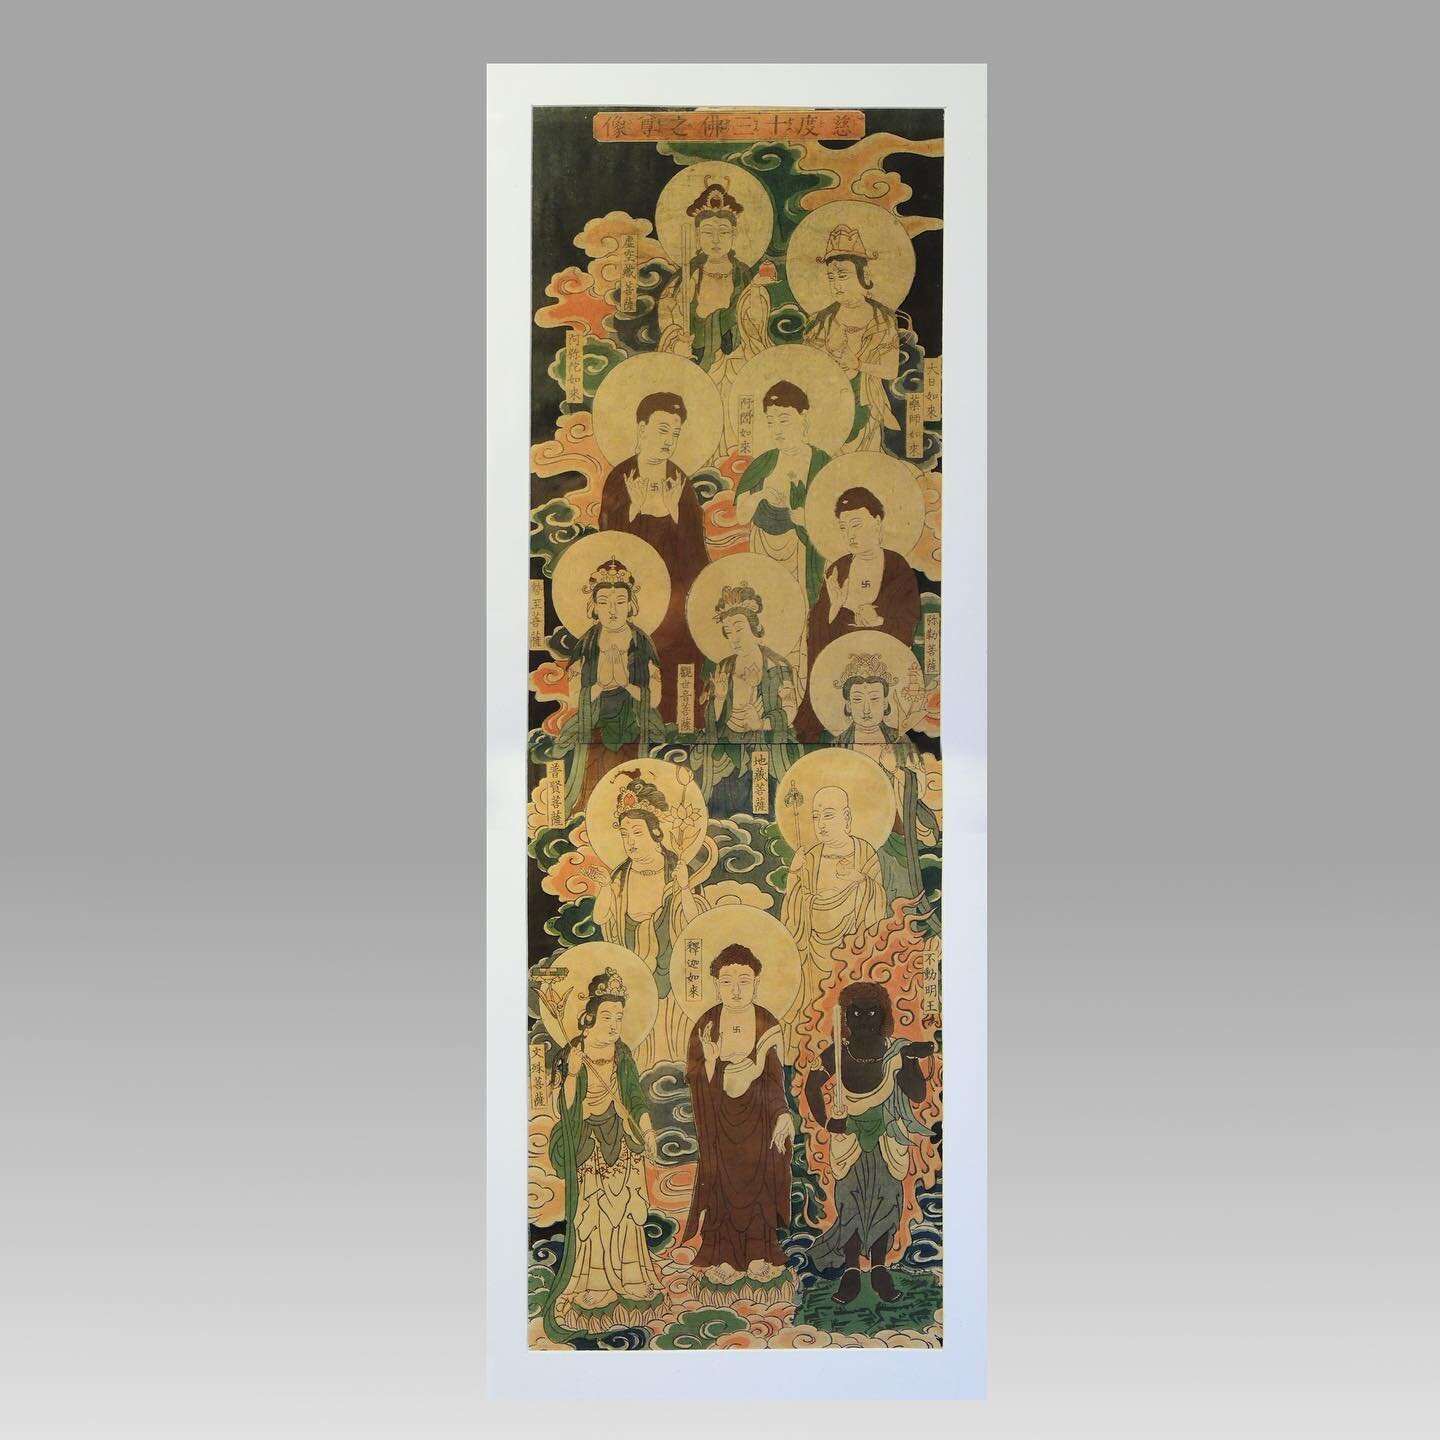 Edo period print of 13 Buddhist deities or more commonly known the 13 Buddhas.  #japan #japanese #japanesebuddhism #japanesegods #japaneseart #japaneseartist #japaneseartgallery #japaneseartmuseum #japaneseprints #japaneseantique #art #artist #artist